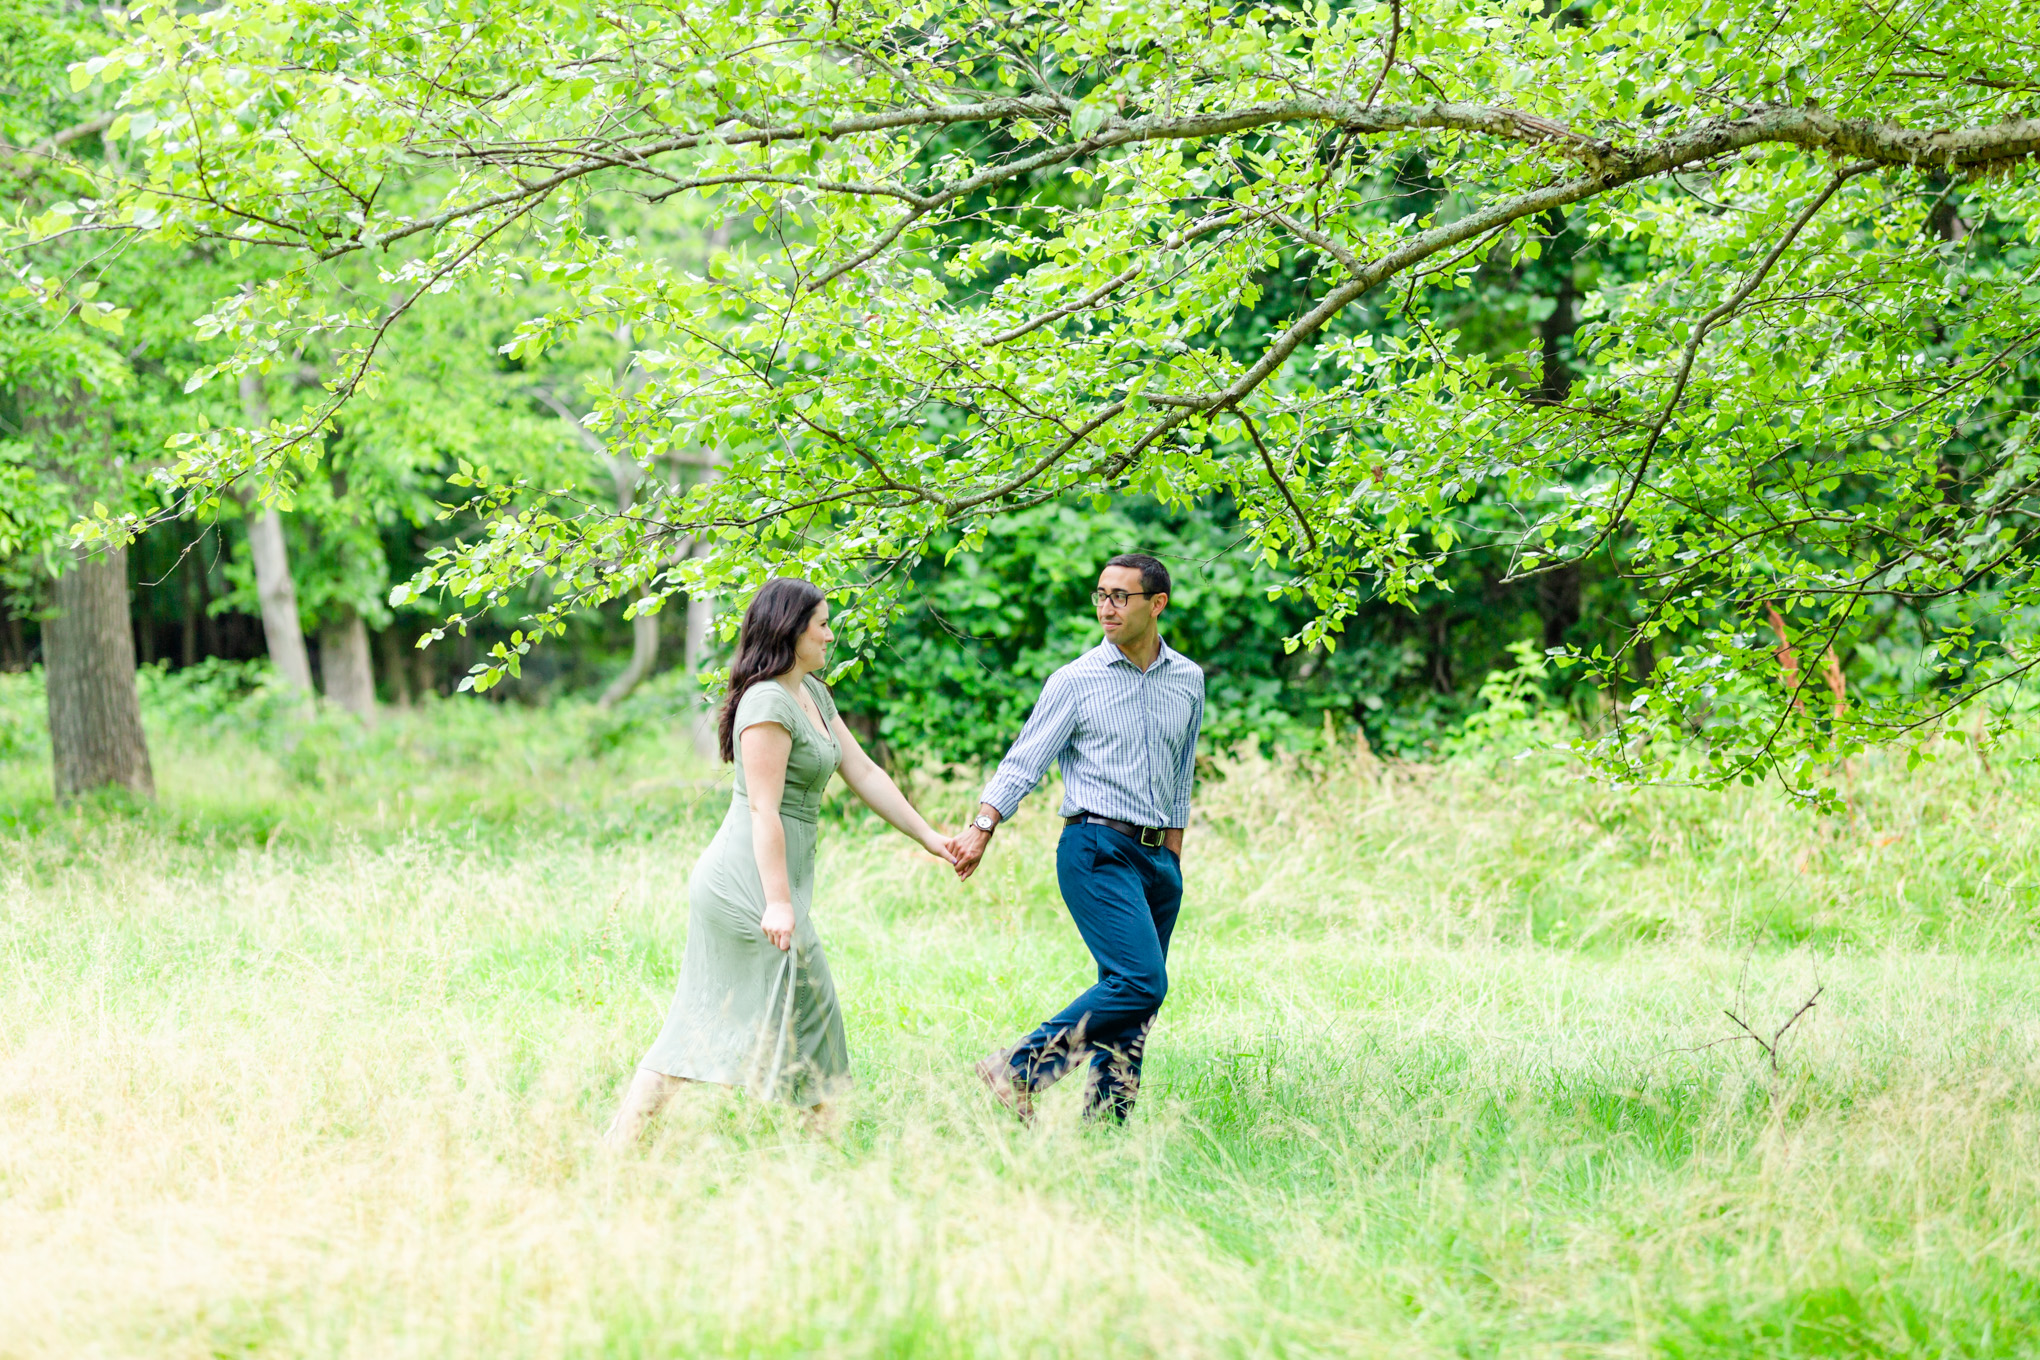 Great Falls Park engagement photos, Great Falls Park, Great Falls Virginia, national park, Great Falls, Great Falls engagement photos, Virginia engagement photos, Virginia engagement photographer, Rachel E.H. Photography, engaged couple, engagement session style, outdoorsy engagement photos, hiking engagement photos, couple walking in a field